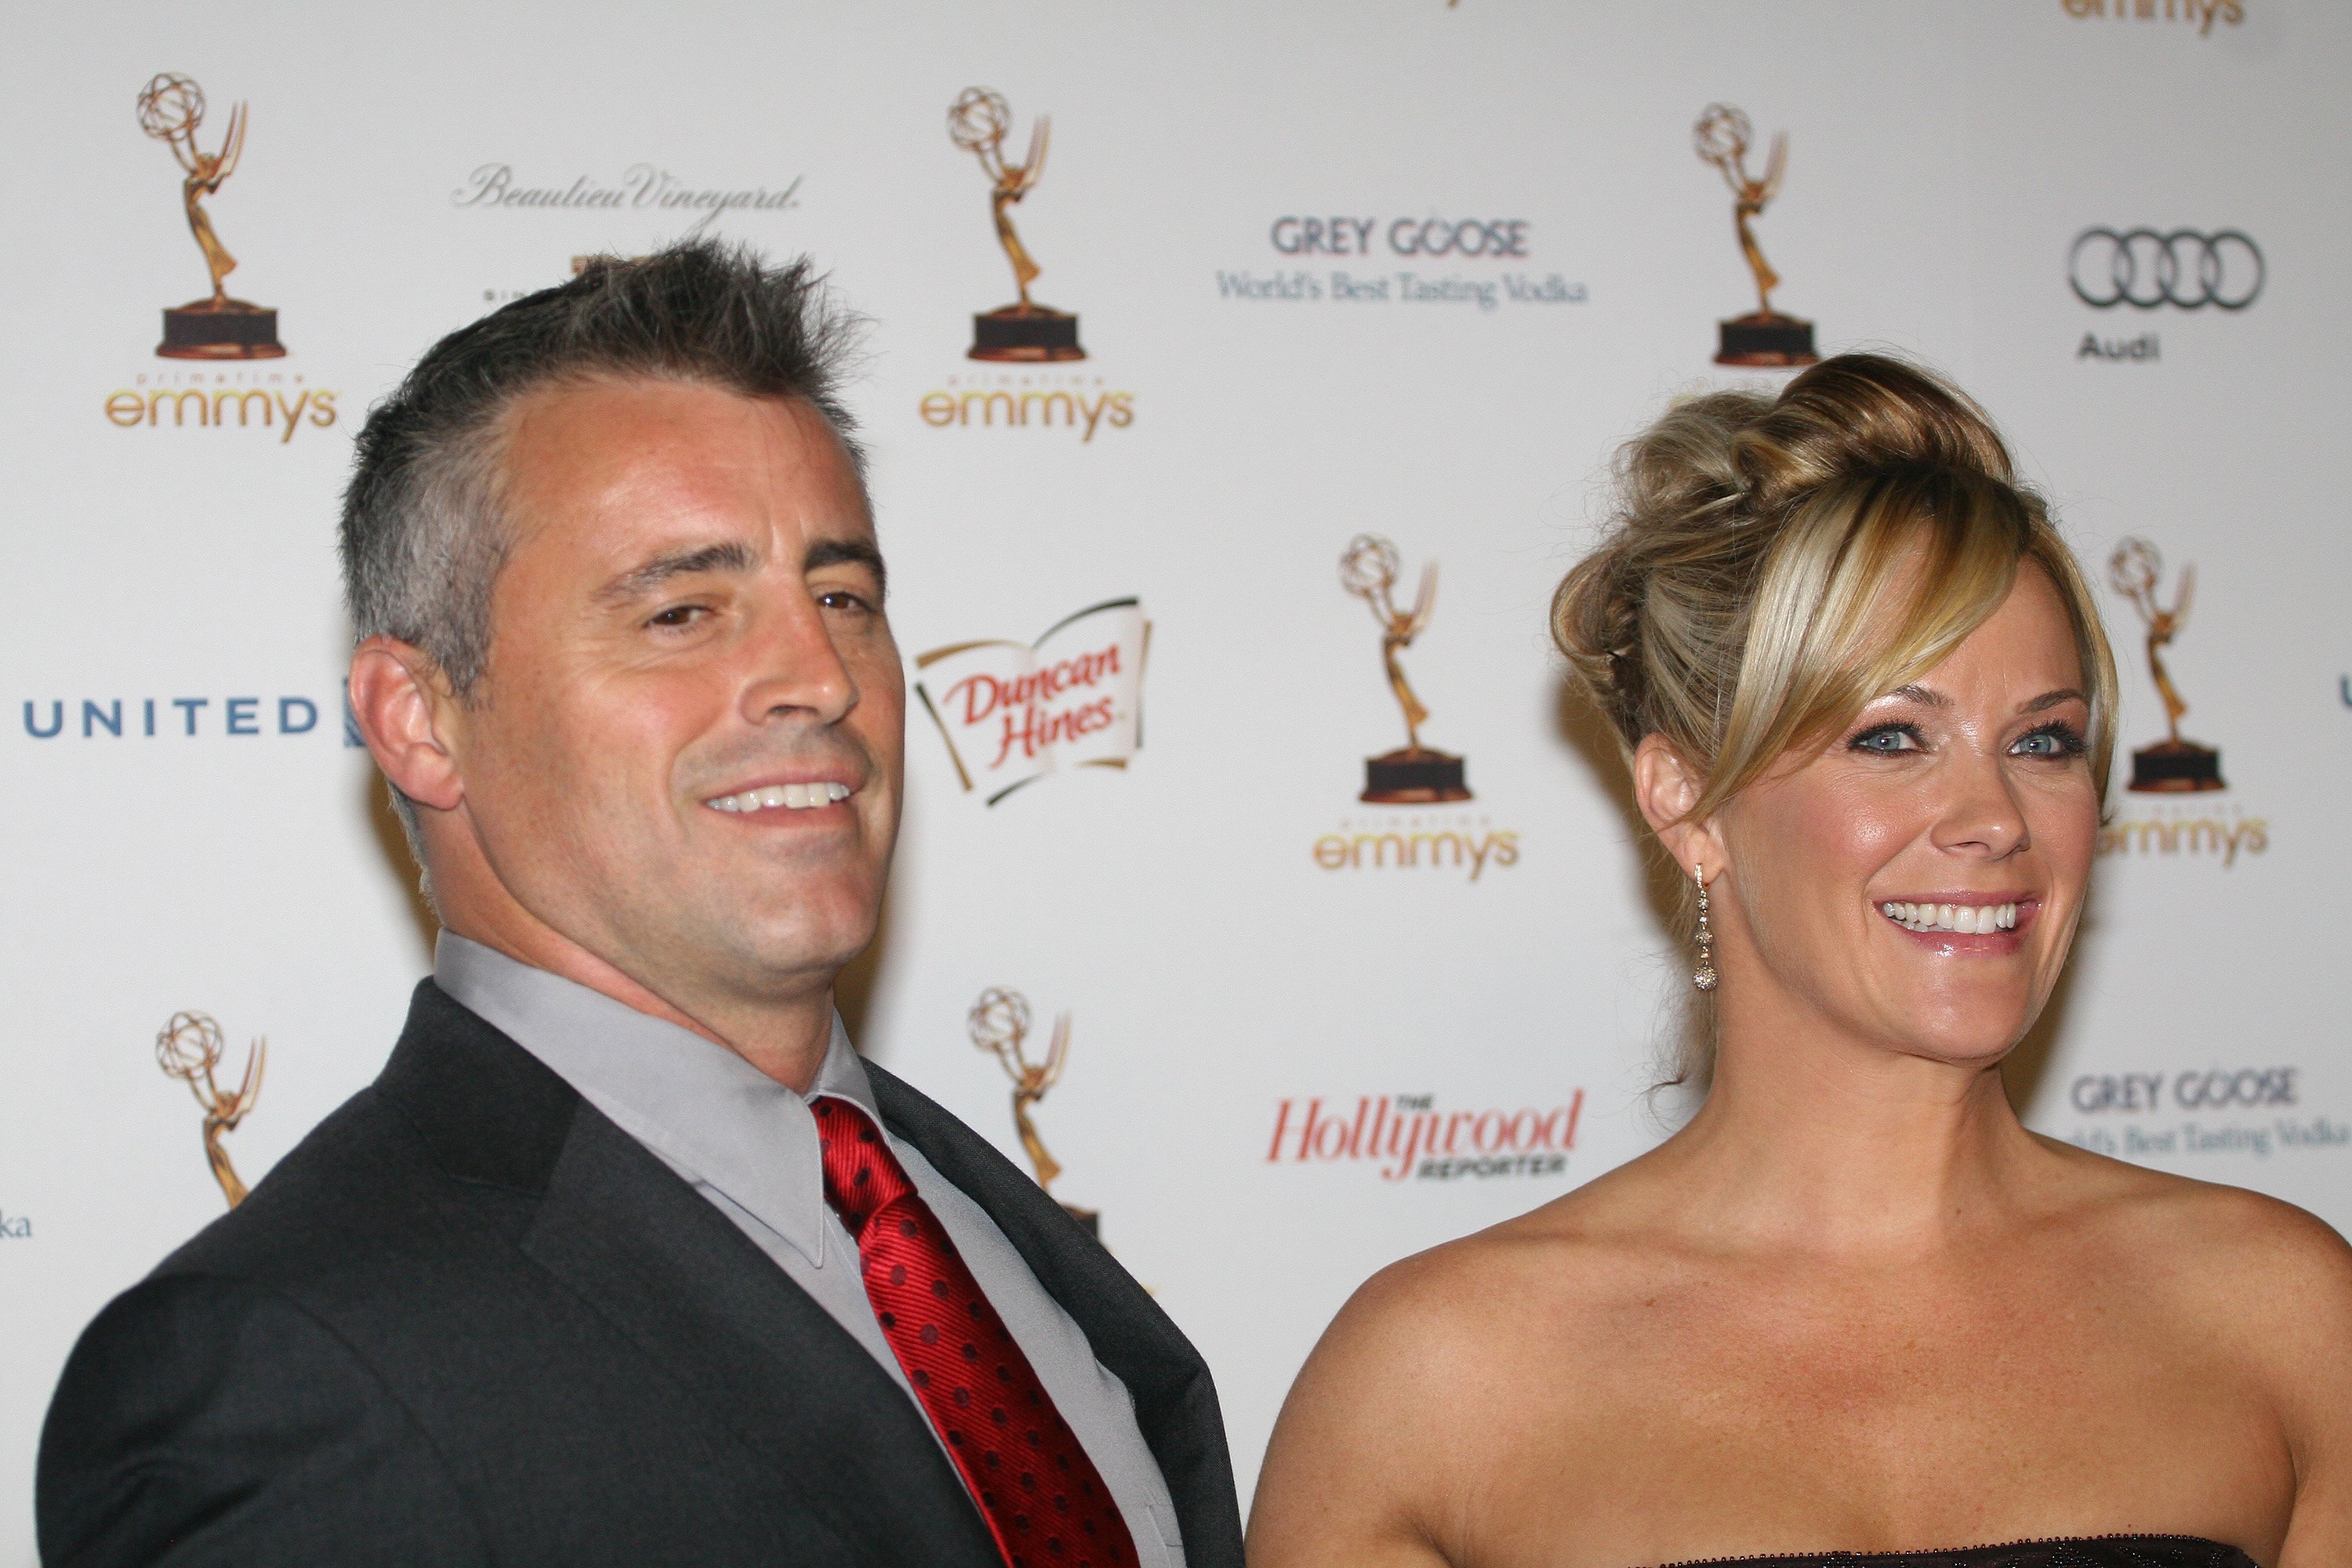 Matt LeBlanc Melissa McKnight at the Pacific Design Center on September 16, 2011, in West Hollywood, California. | Source: Getty Images